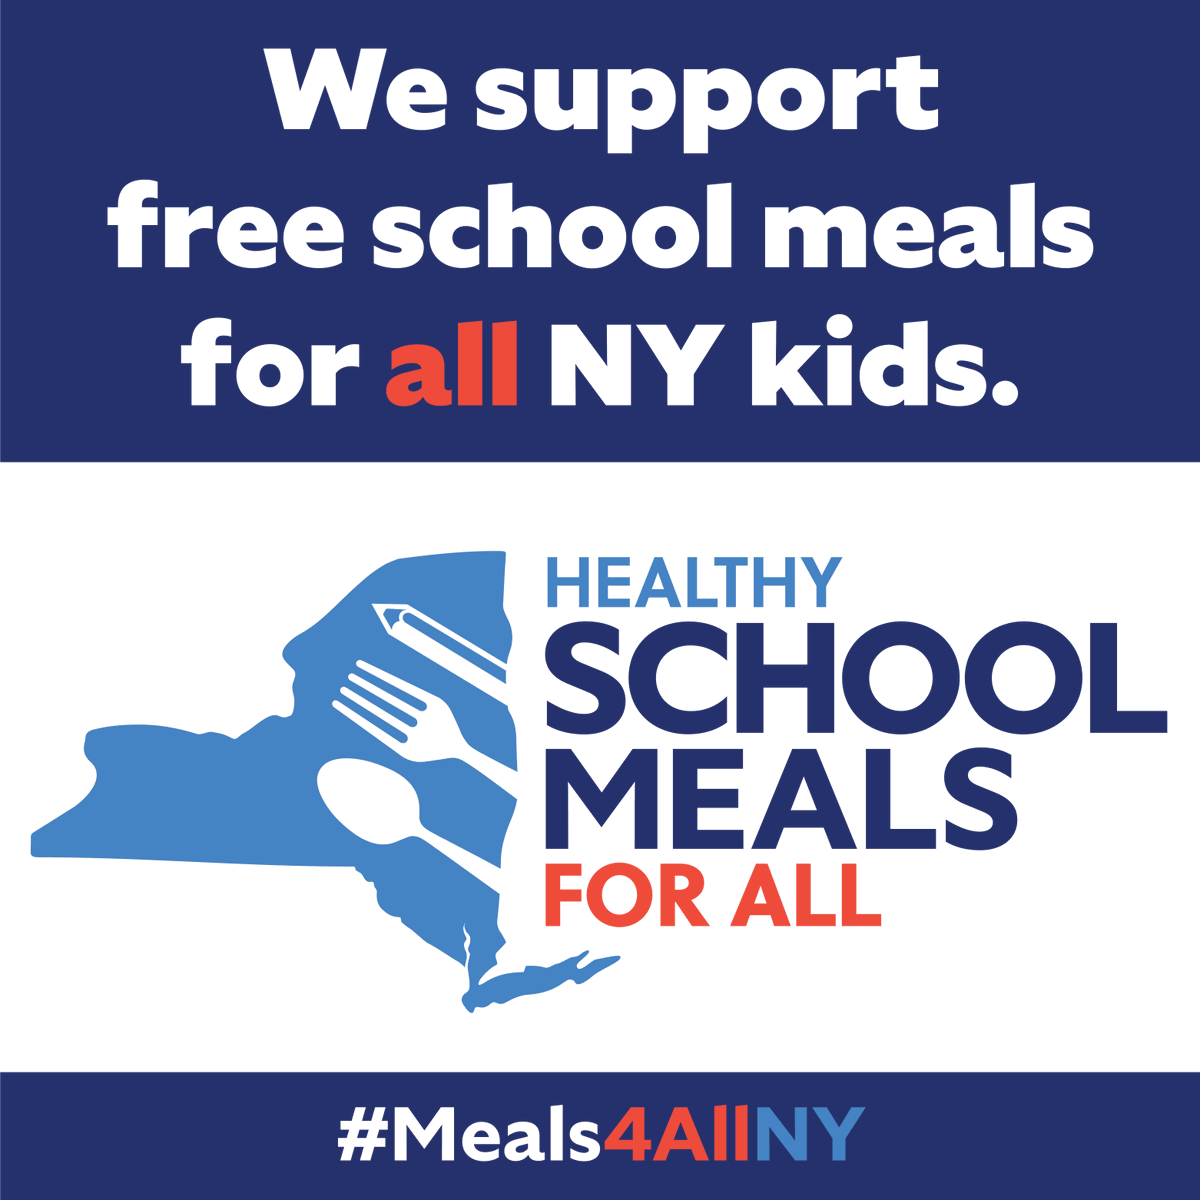 Our call to action is simple: Feed NY's kids. A patchwork approach that provides free school meals to some kids is not enough. Call TODAY to urge lawmakers to close the gap & fully fund #Meals4AllNY! bit.ly/HSMFANY-ActNow @GovKathyHochul @AndreaSCousins @CarlHeastie